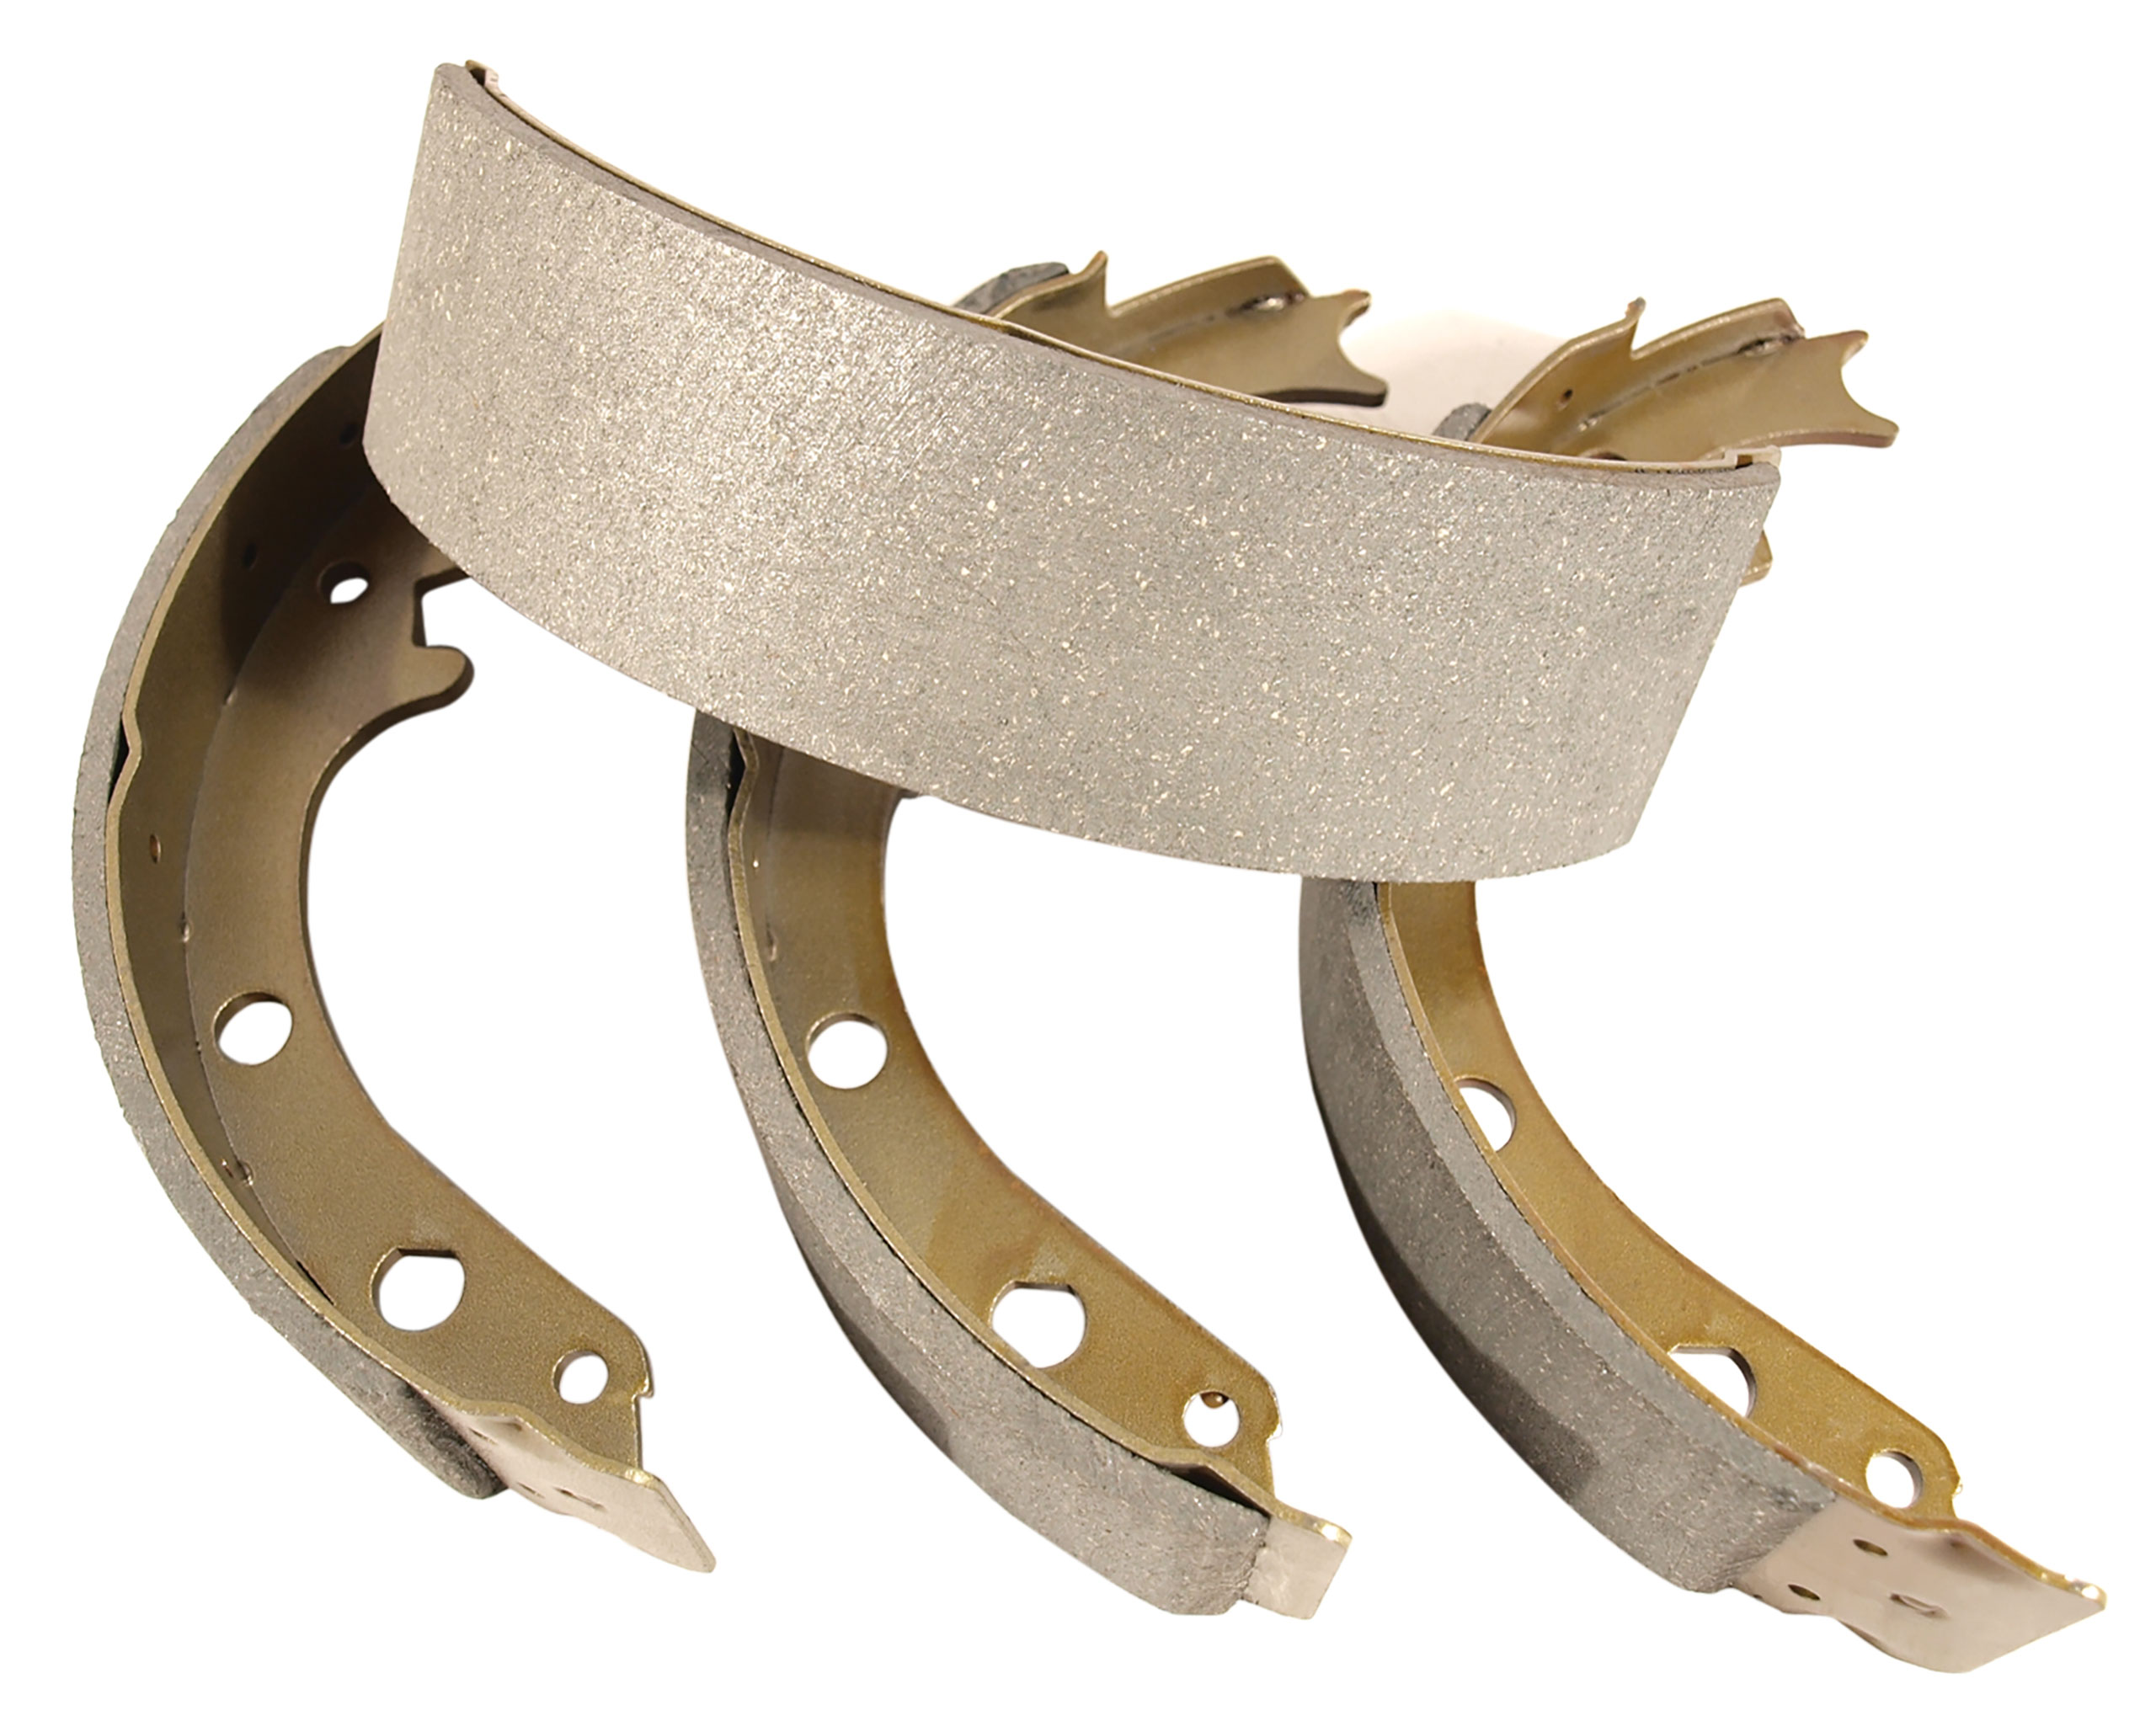 Raybestos 1965-1970 Ford Mustang Front or Rear Brake Shoe Axle Set - 9